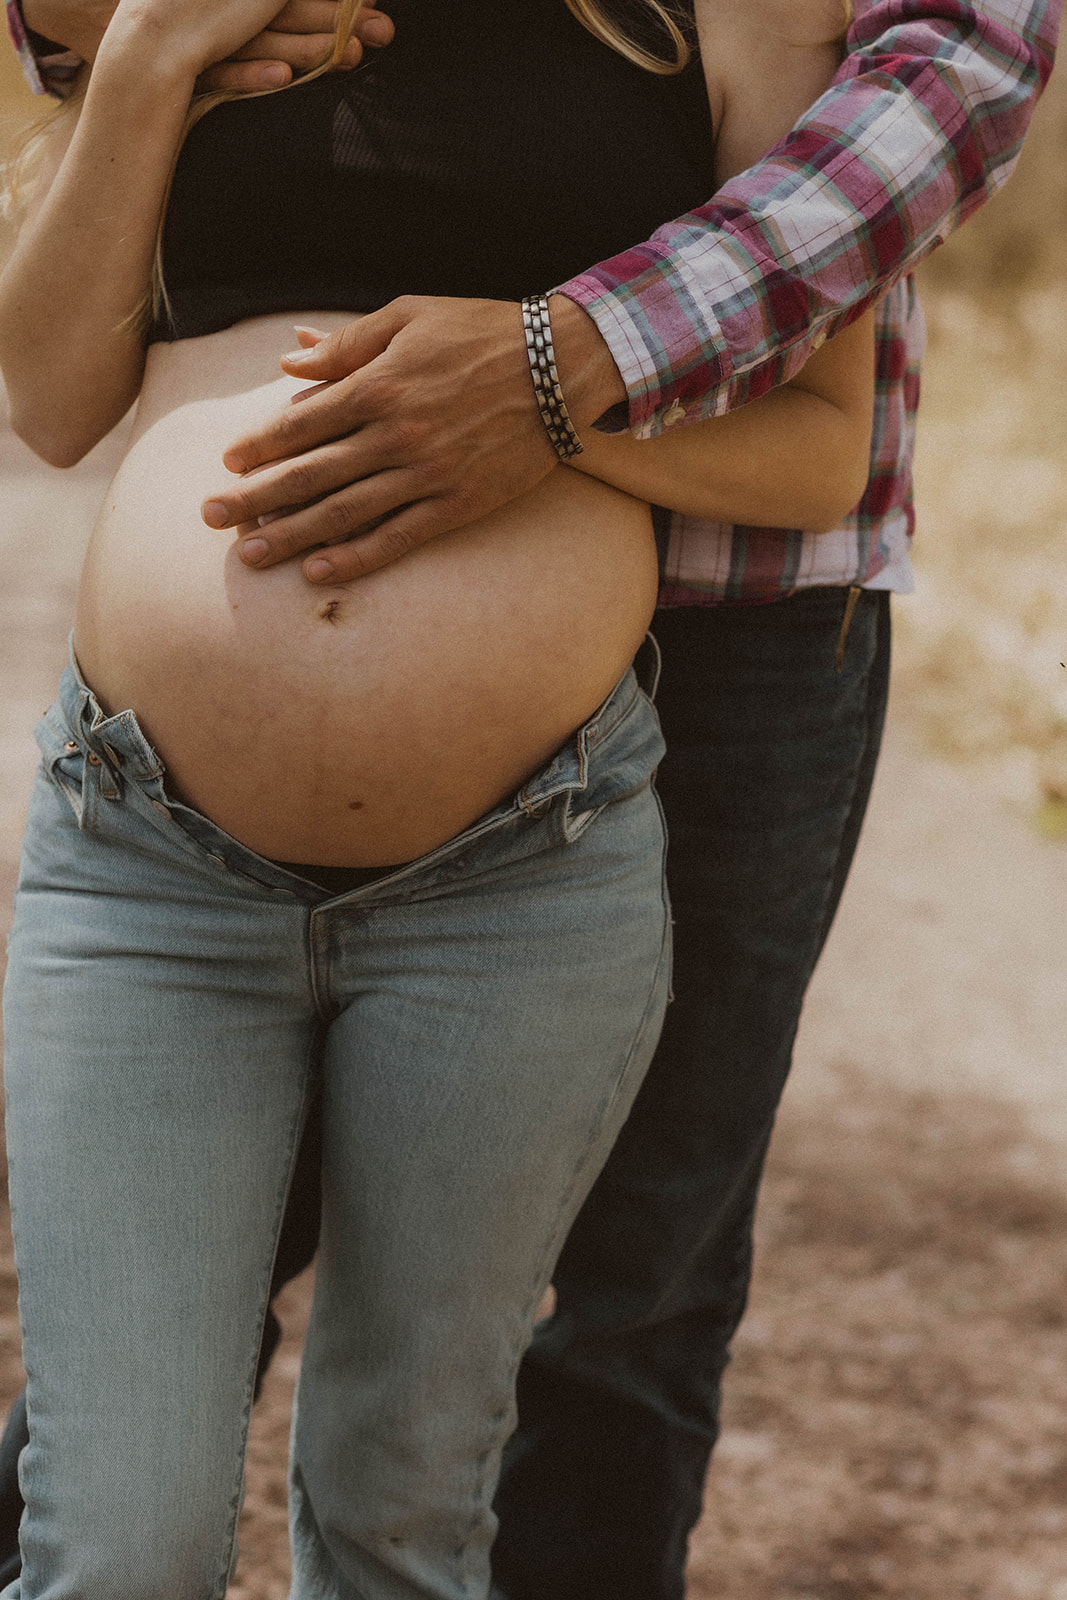 Future parents pose intimately together during their NY maternity photos